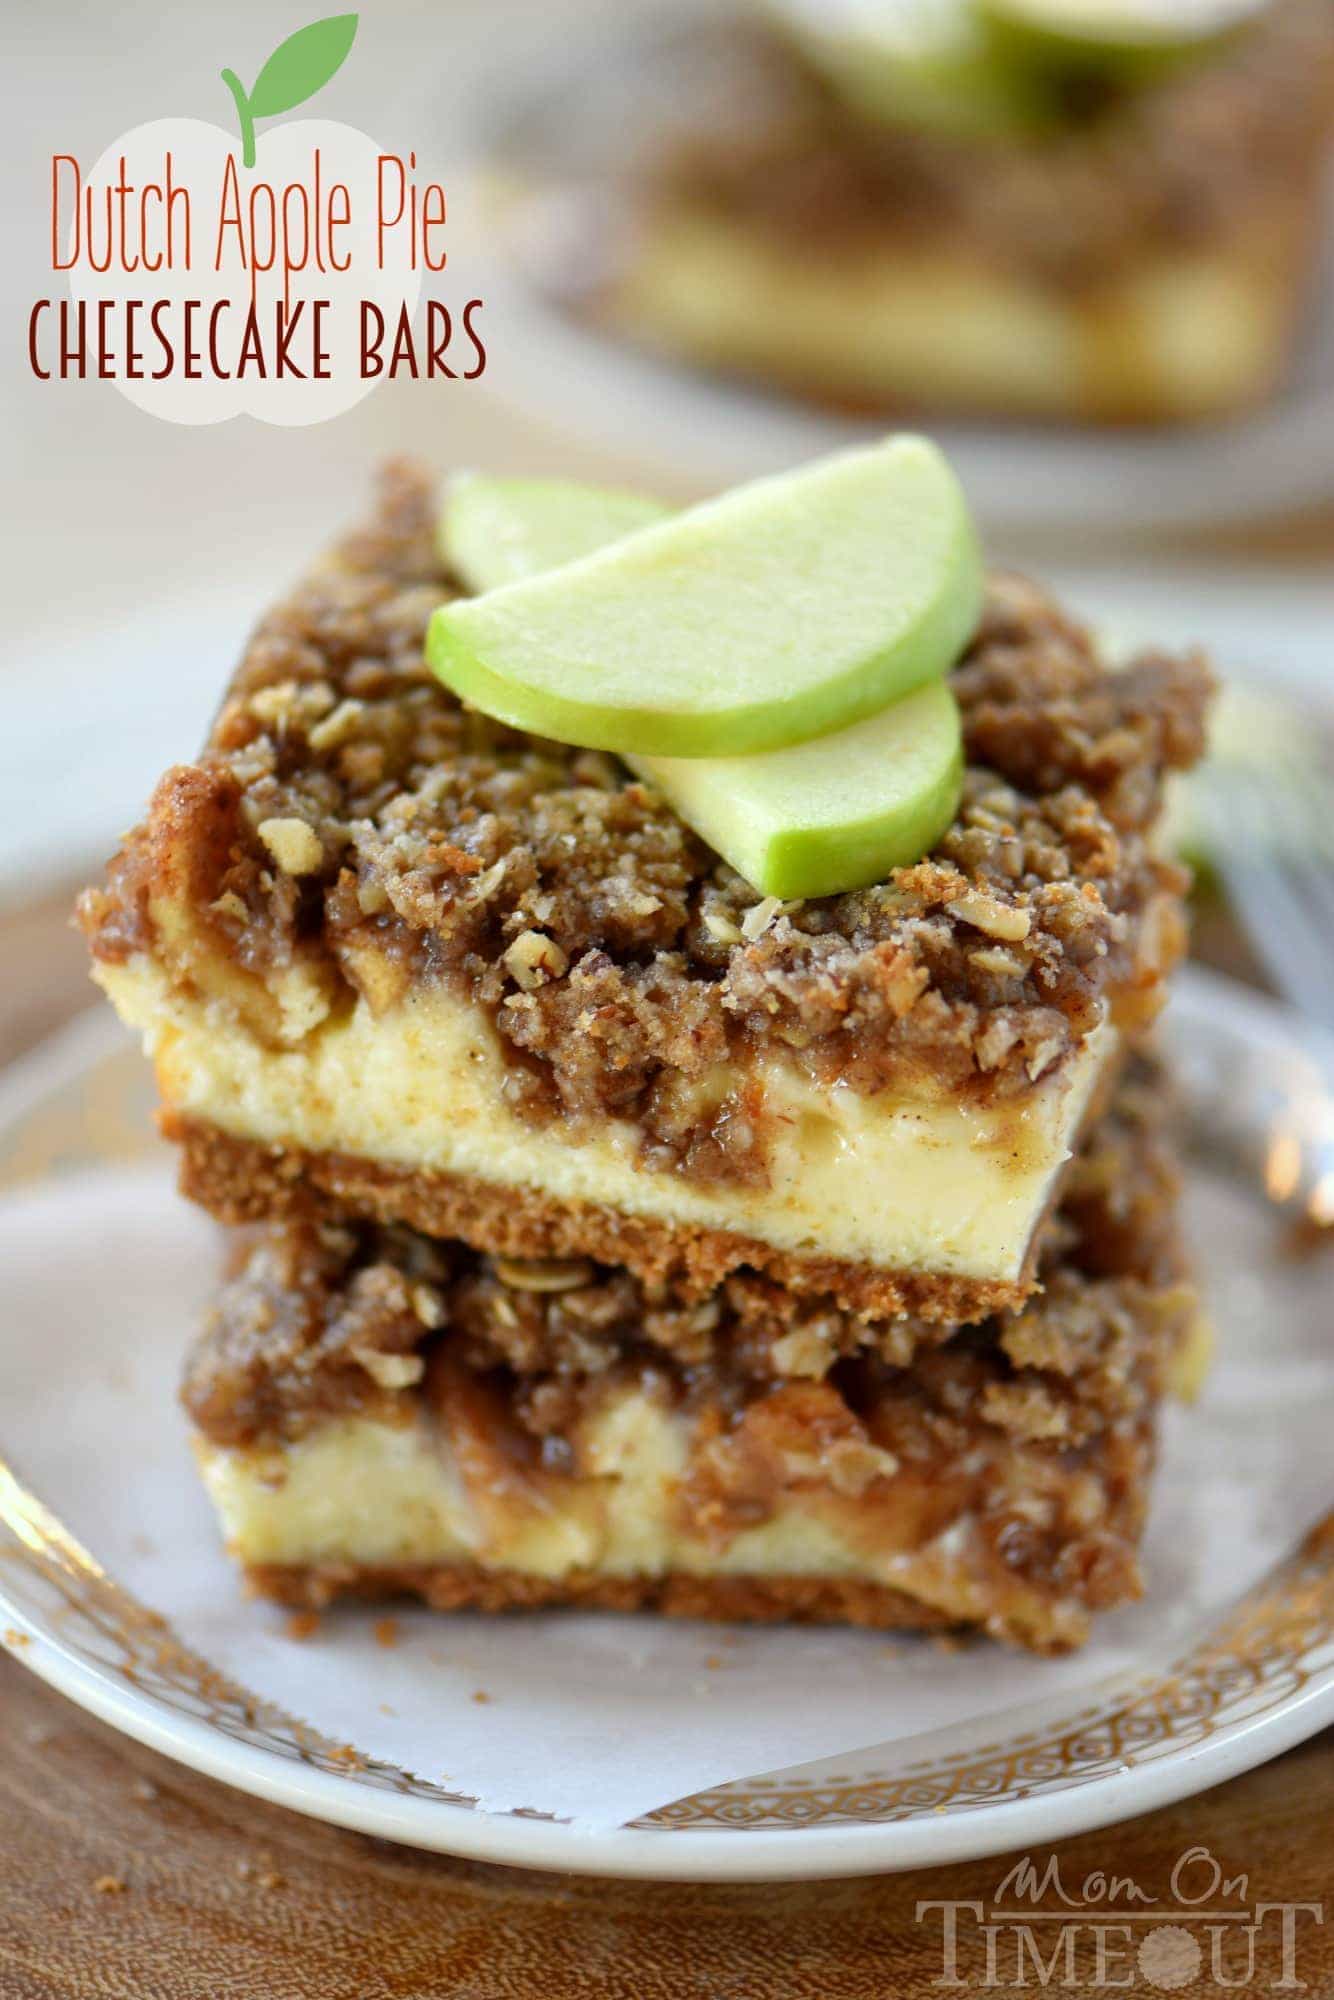 Apple season has arrived and to celebrate, I'm sharing these outrageous Dutch Apple Pie Cheesecake Bars! A graham cracker crust spiced with cinnamon, a decadent vanilla bean cheesecake layer, apples tossed in sugar, cinnamon, and nutmeg and finally my favorite streusel topping. Yeah, WOW. | Mom On Timeout